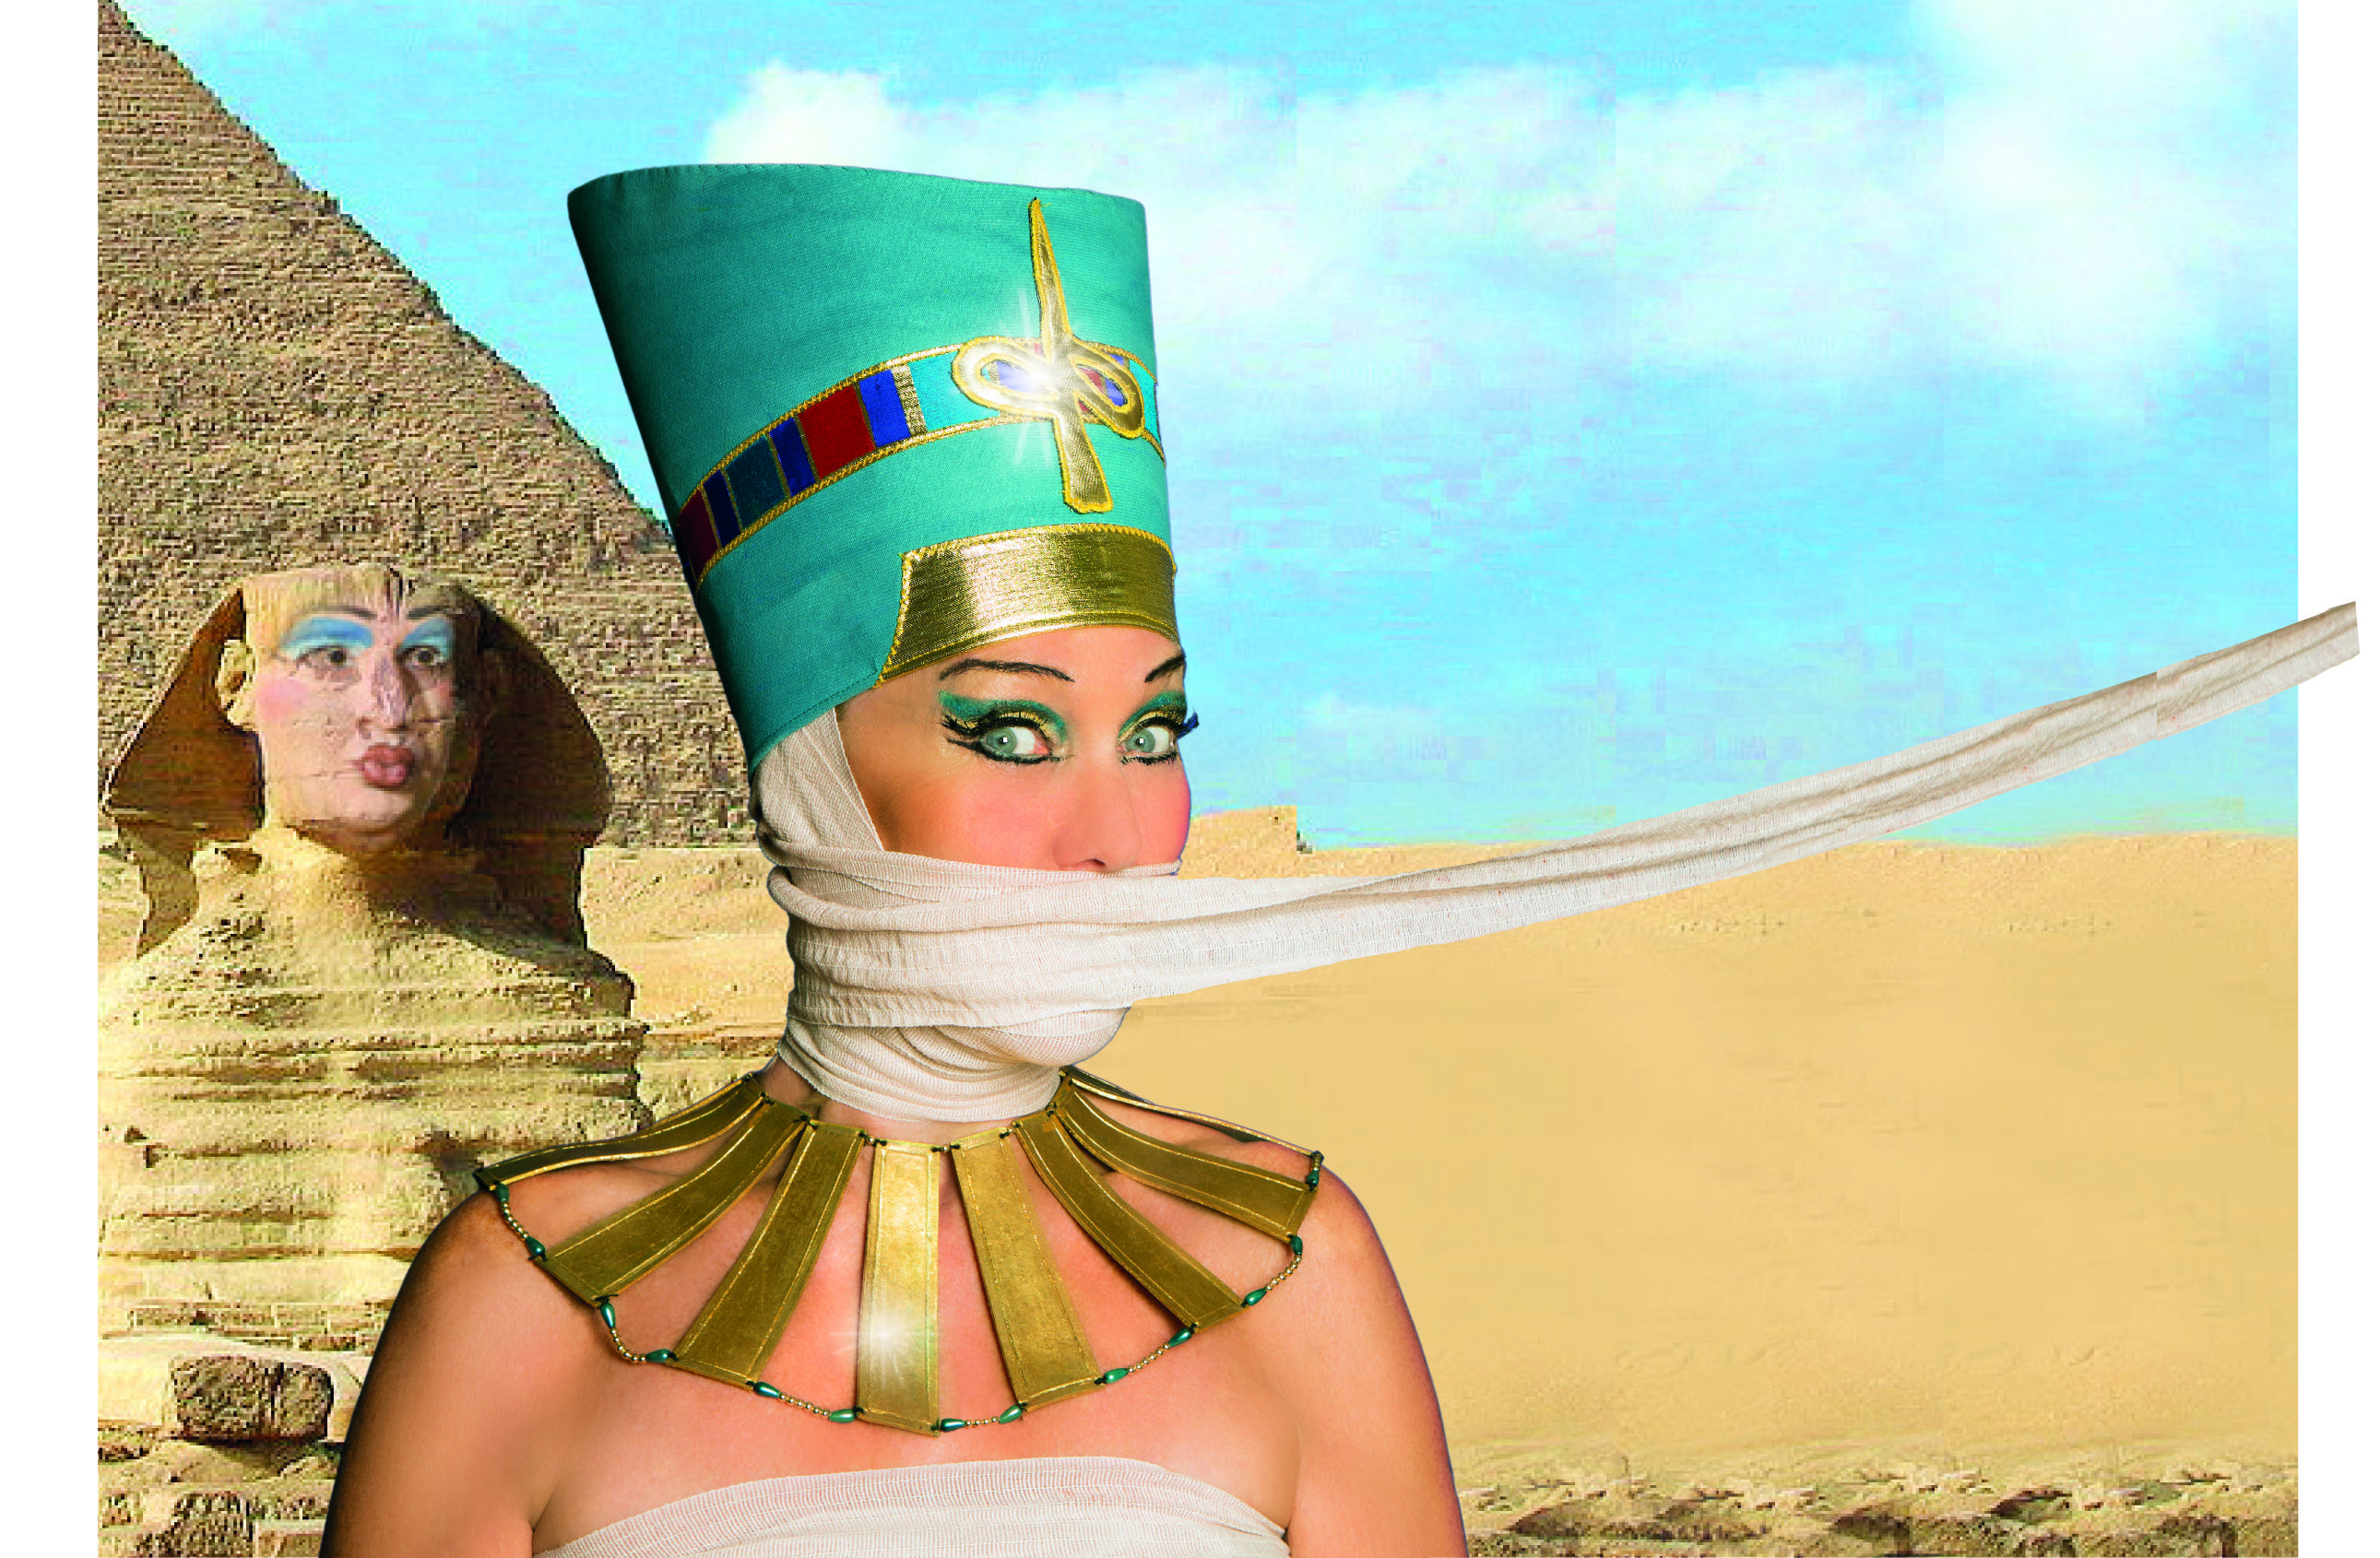 Visit the Queen’s pyramids!